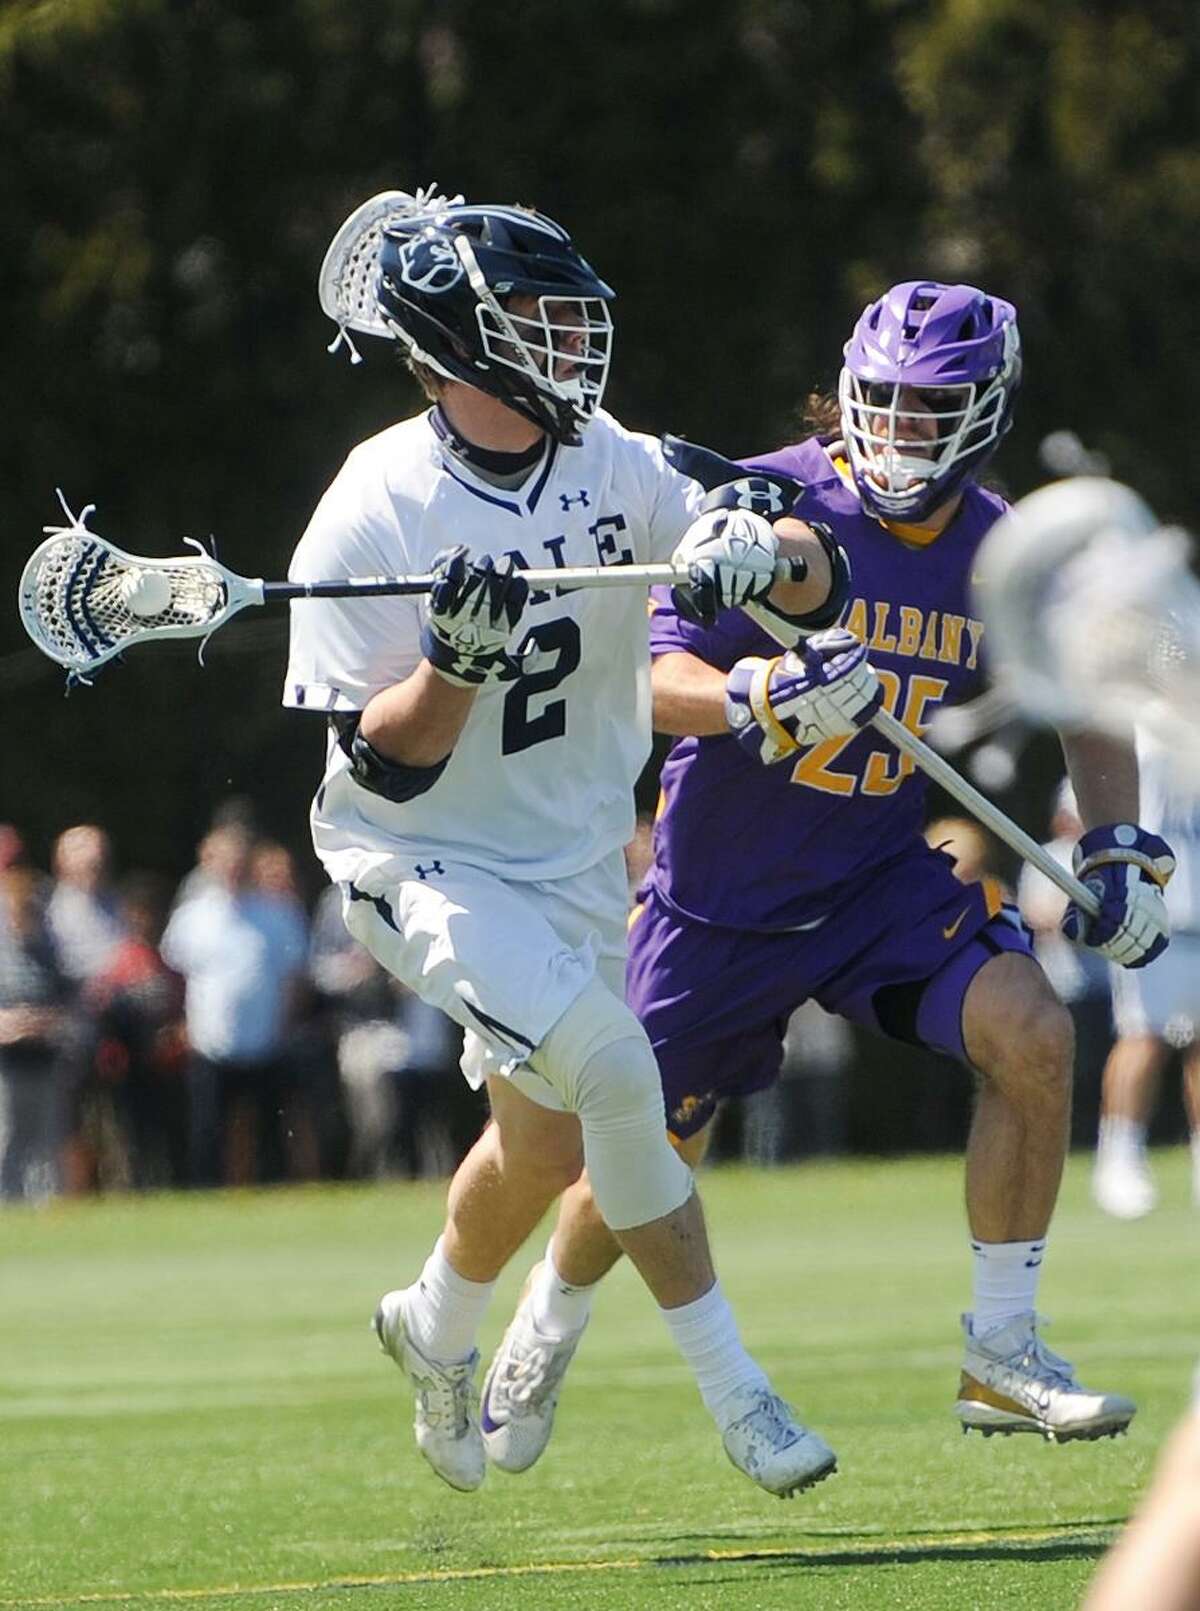 Yale men's lacrosse looks to rebound against UMass in NCAA tournament